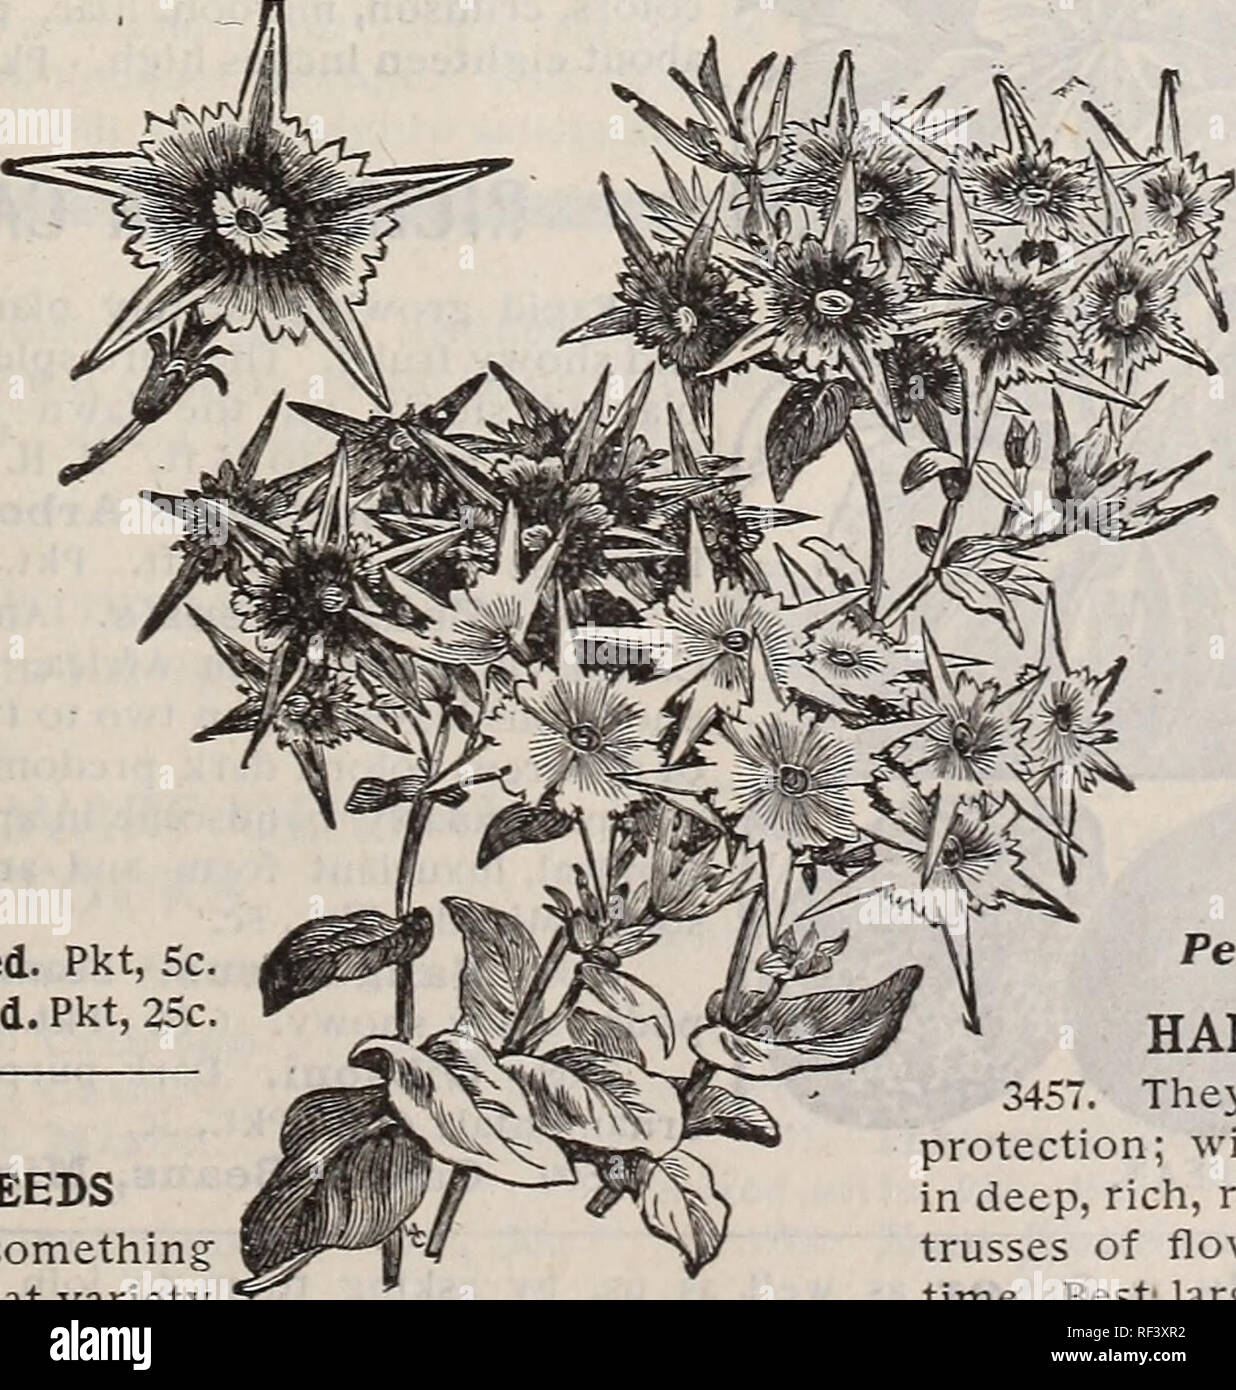 . Novelties and specialties for 1897. Nursery stock Illinois Chicago Catalogs; Seeds Varieties Catalogs; Flowers Seeds Catalogs; Bulbs Plants Catalogs; Flowering shrubs Catalogs. TYPES OF PHLOX DRUMMONDI. PORTULACCA. (rose moss.) This is undoubtedly one of the neatest and best adapted little annuals for rock work, baskets or beds. If sown in sunny places it will bloom in great profusion, and the flowers of the double sorts remain open all day. 6 inches. H. A. 3212. Single White. Pkt., 3c. 3213. &quot; Pink. &quot; 3c. 3214. &quot; Scarlet. &quot; 3c. 3219. &quot; Yellow. &quot; 3c. 3220. &quot Stock Photo